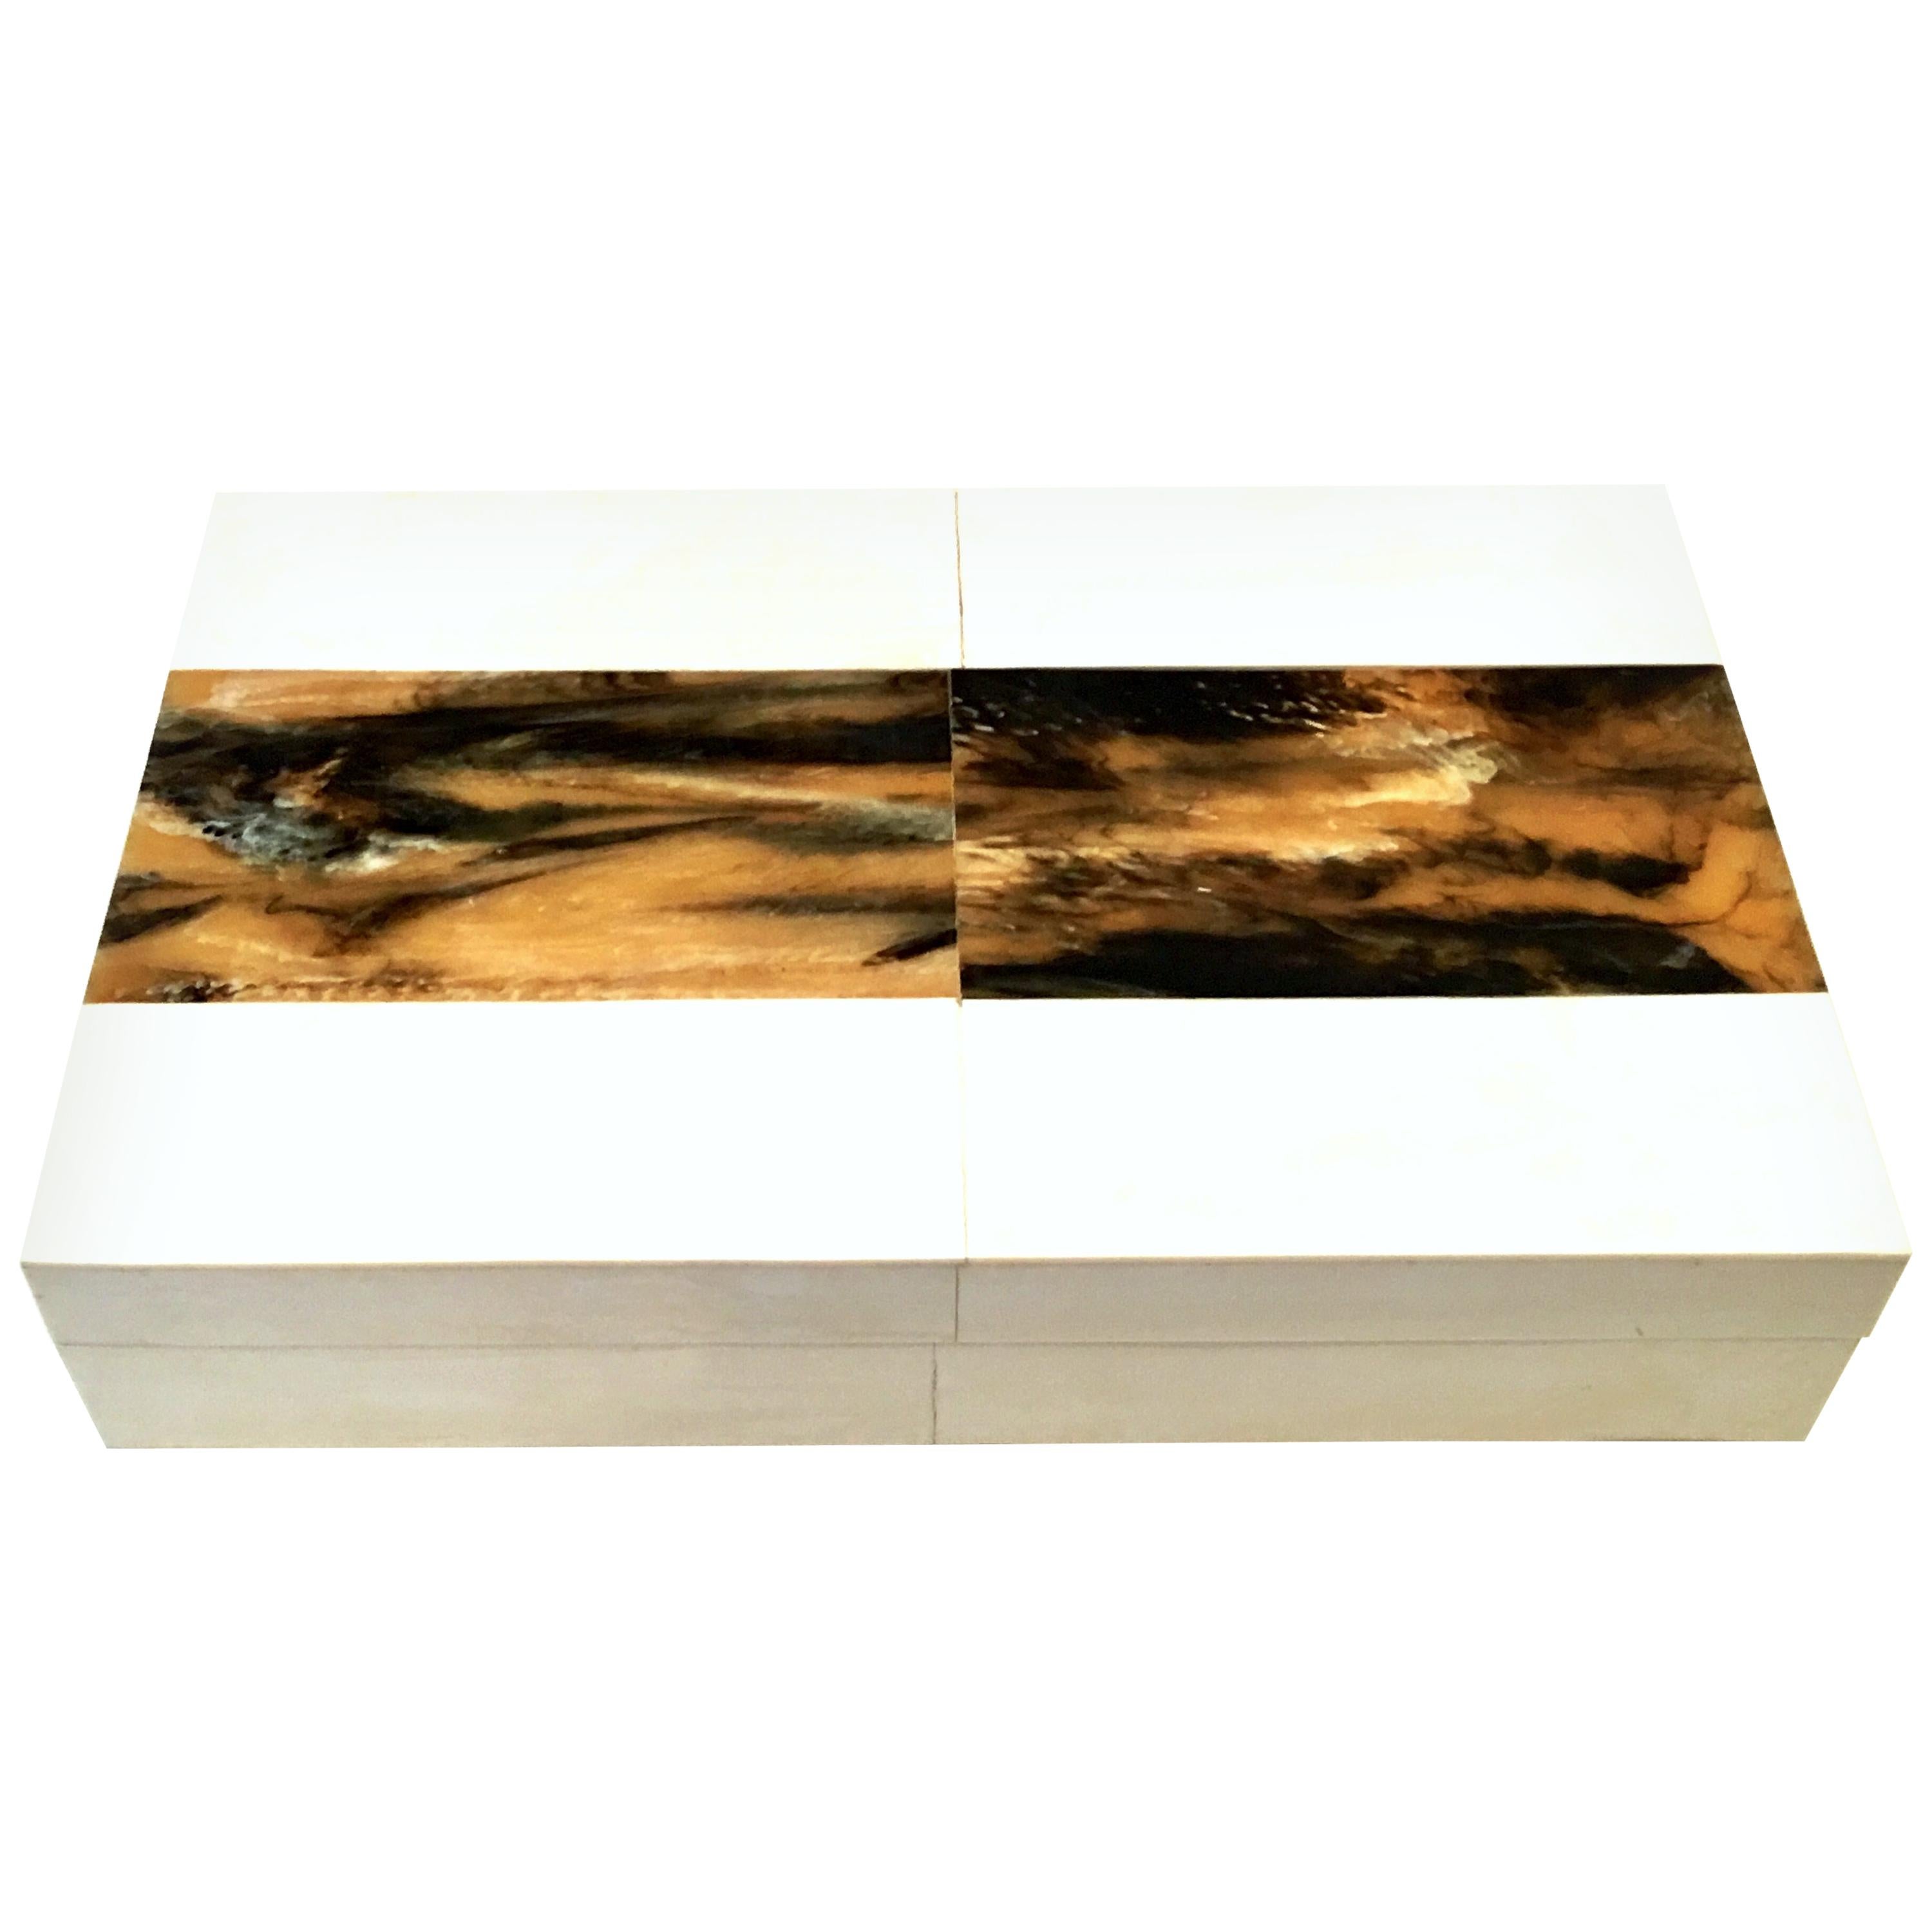 21st Century Maple & Madagascar Rosewood Inlay Large Lidded "Letter" Box For Sale